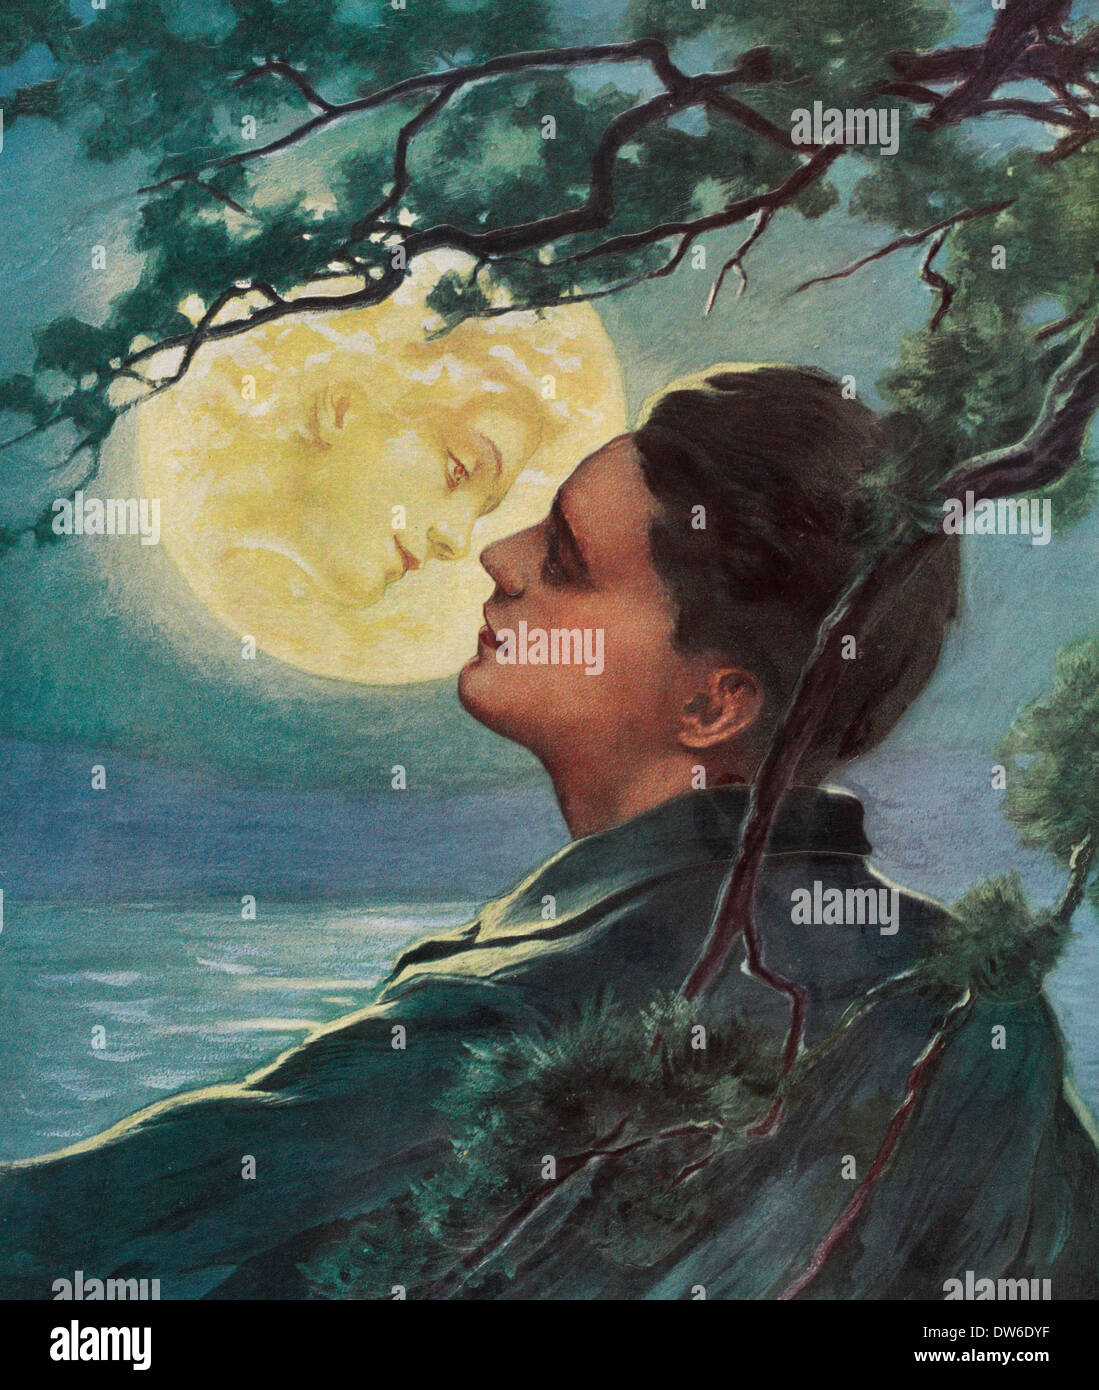 The girl in the moon, man about to kiss a woman's face in the moon, circa 1909 Stock Photo